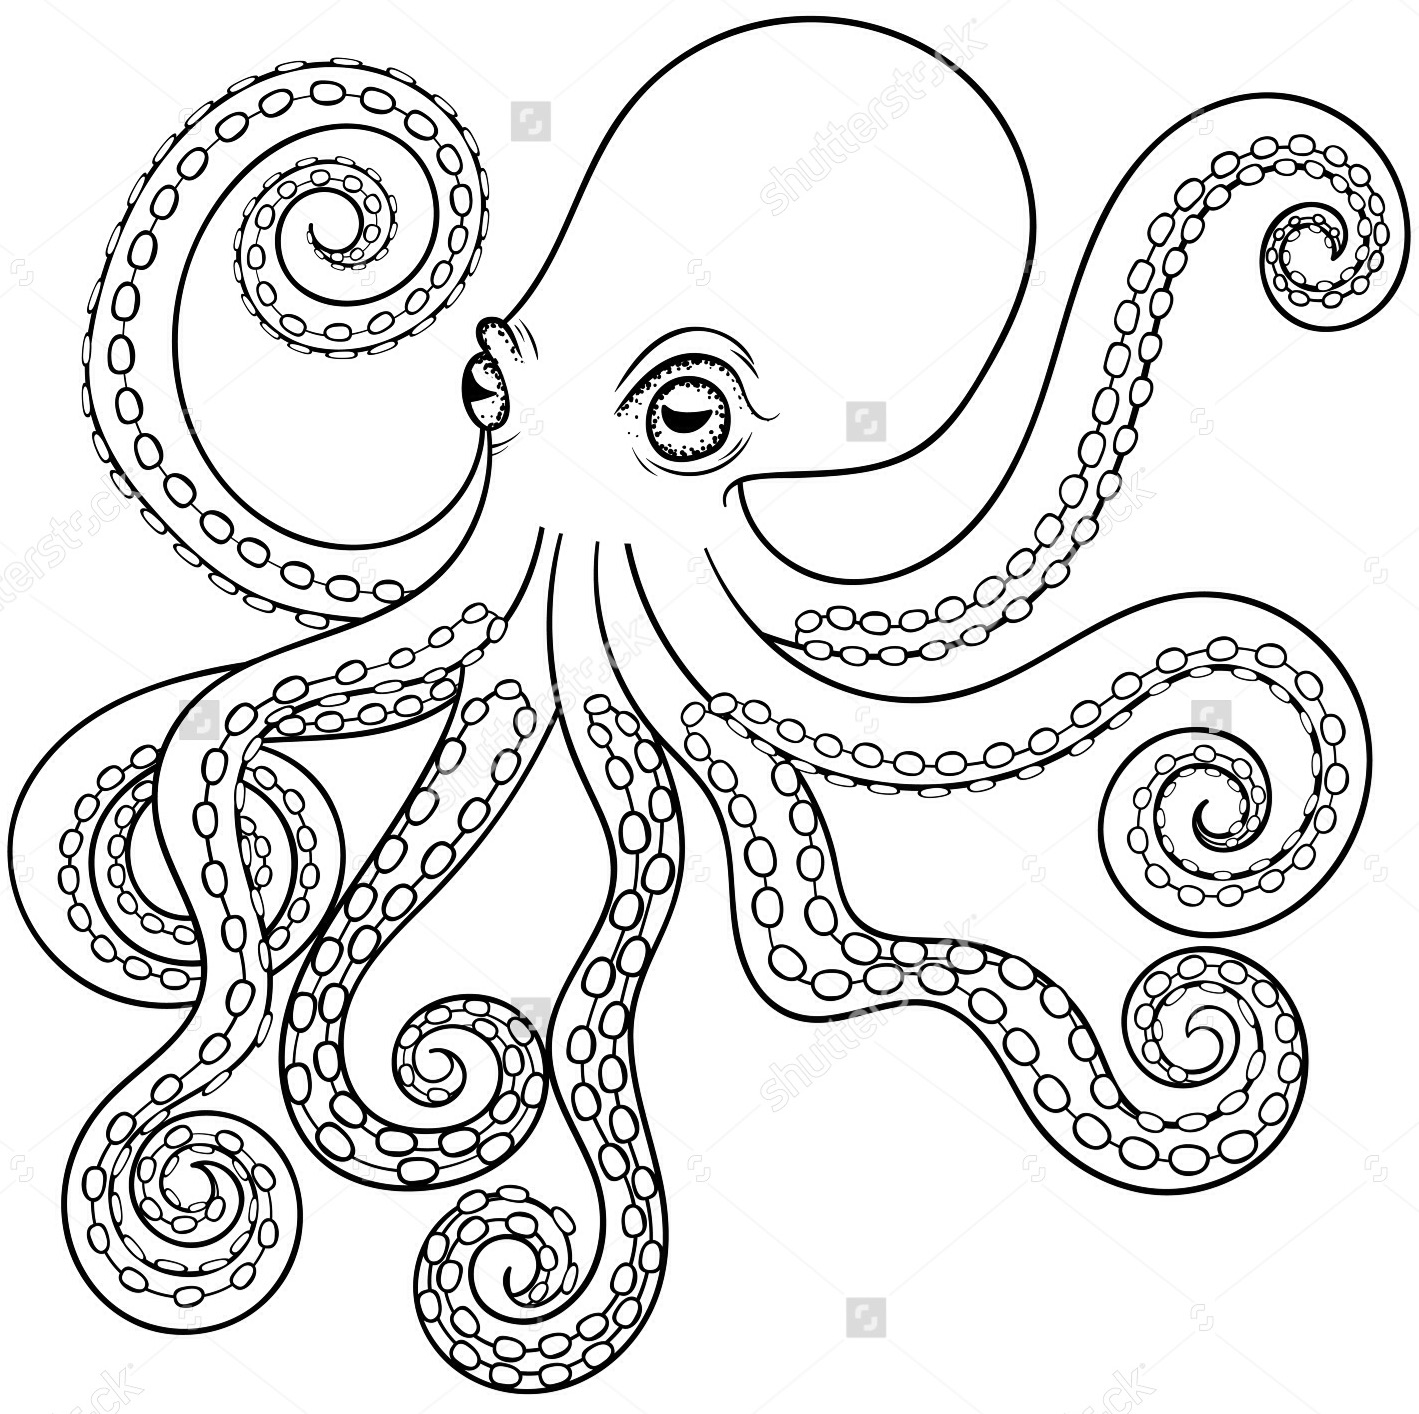 Octopus Drawing Pictures at GetDrawings | Free download